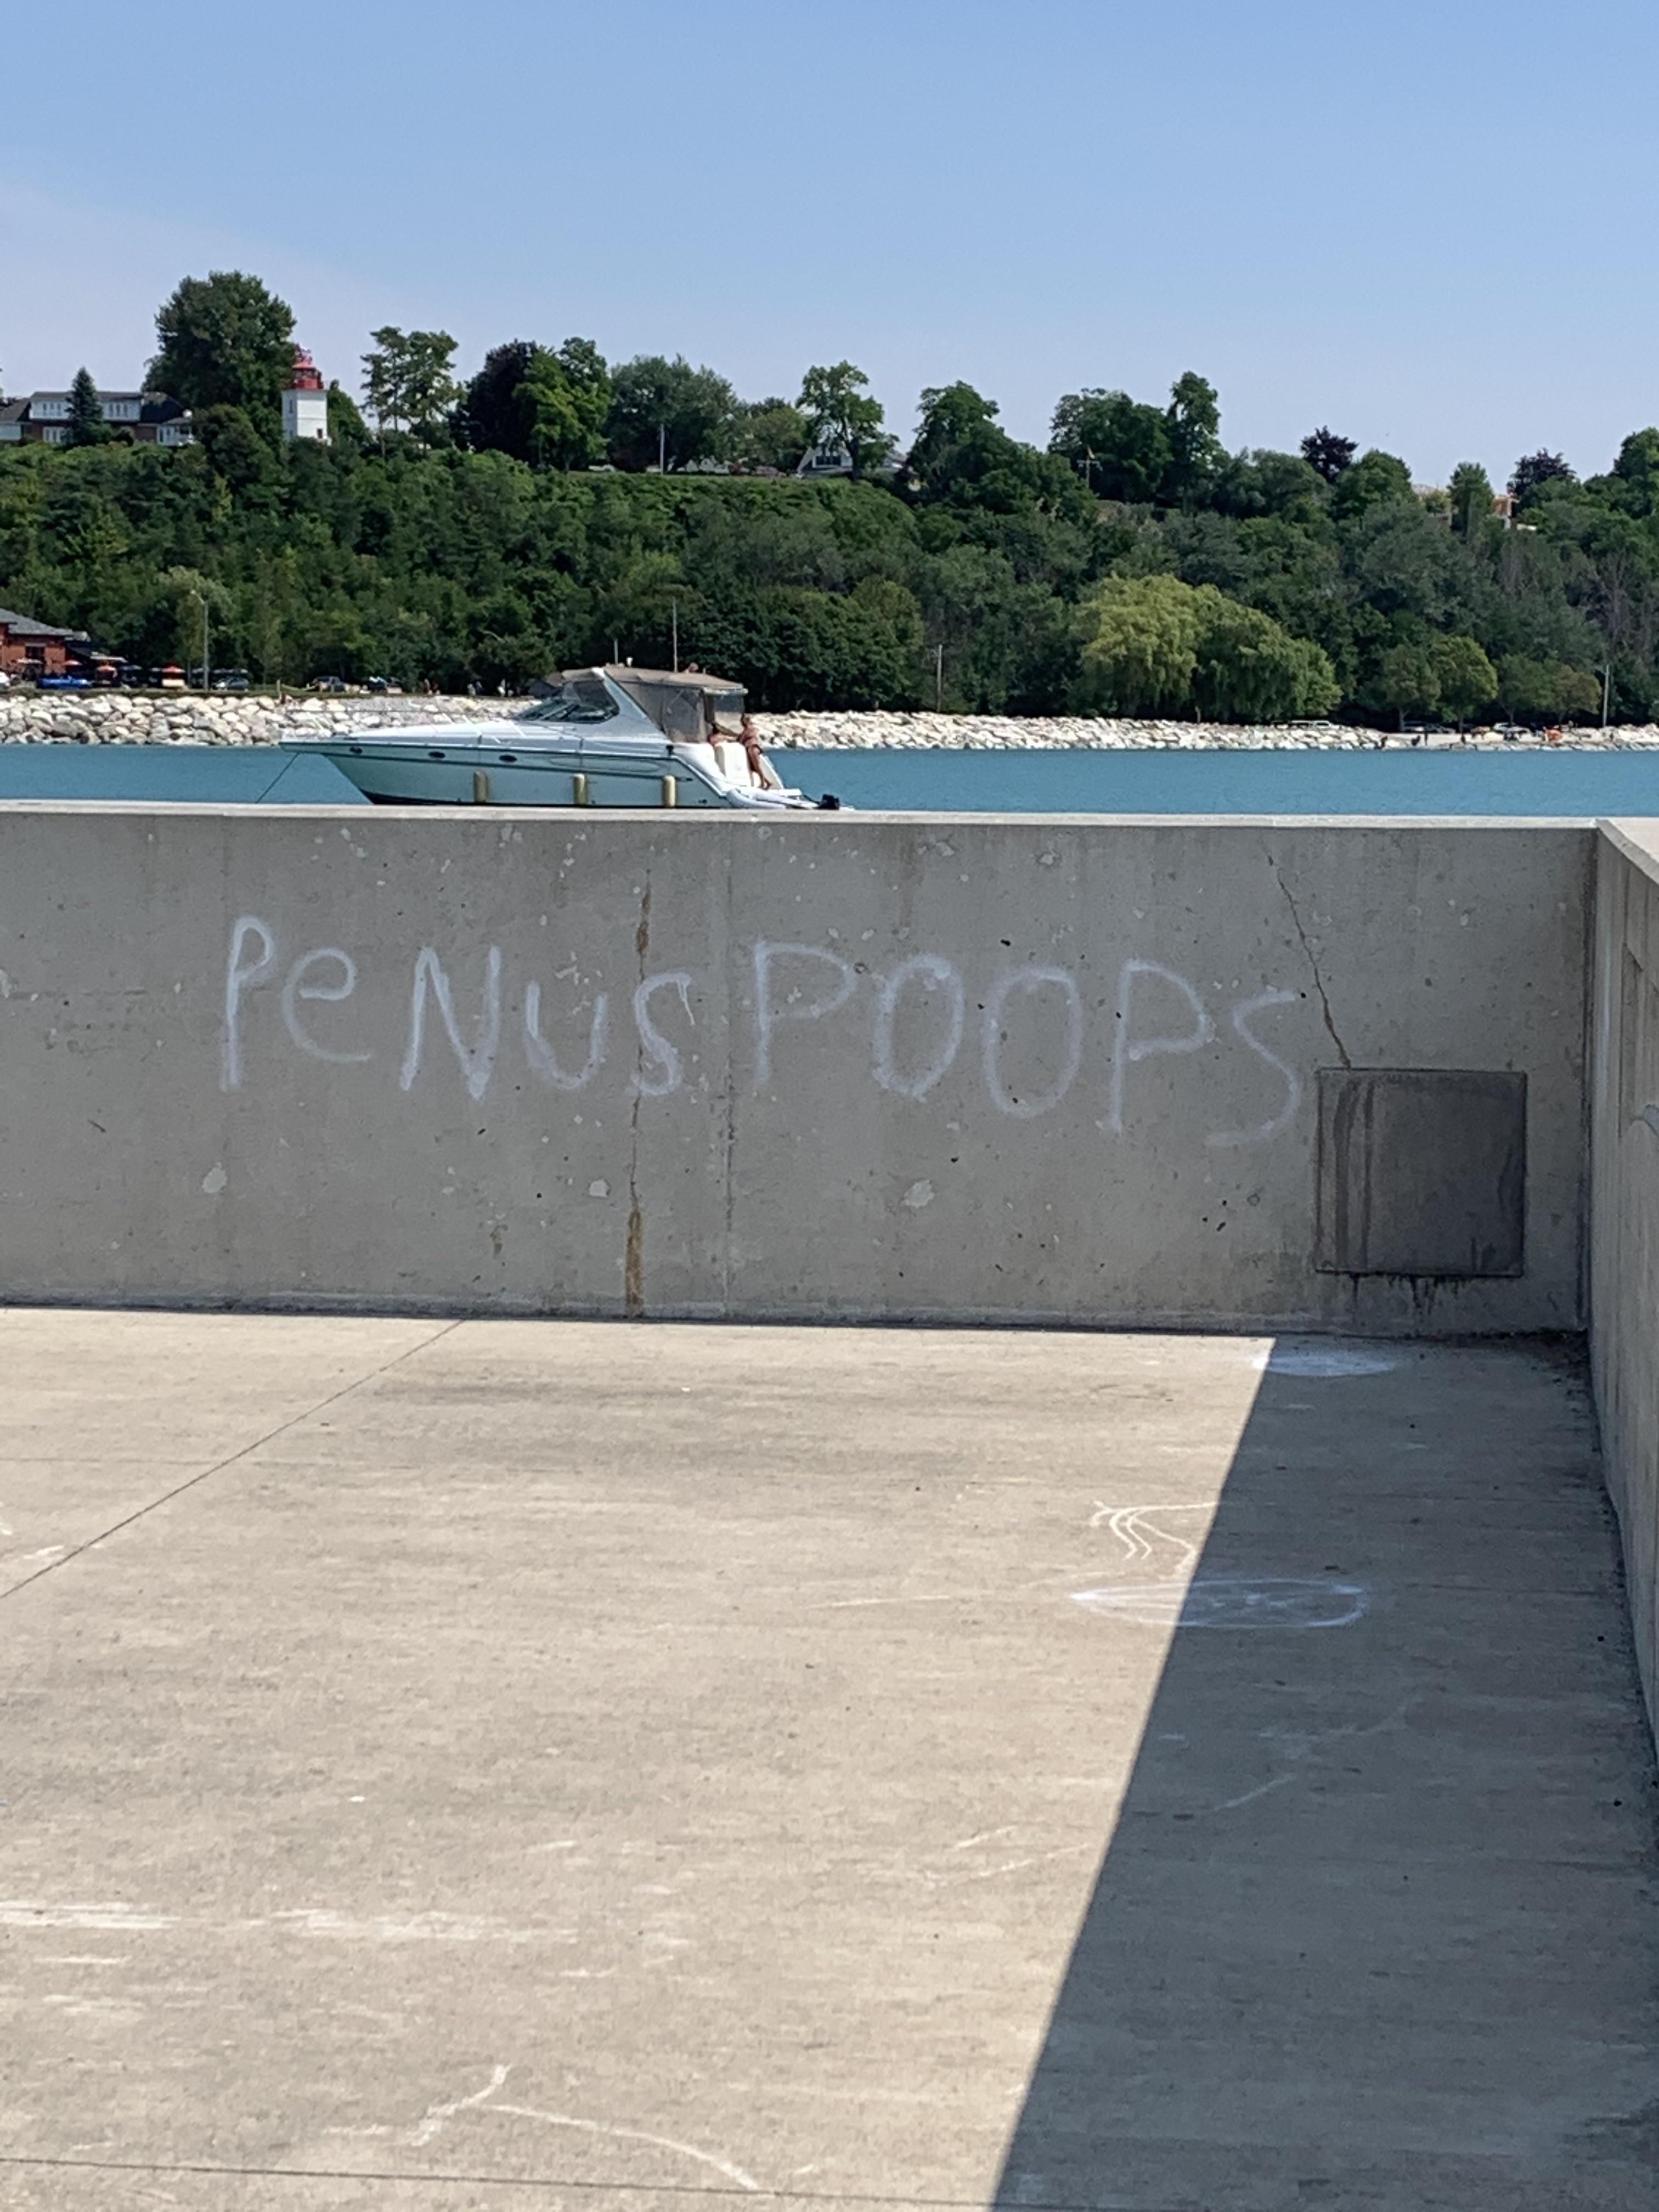 I saw this graffiti on a pier a couple years ago and I still think about it often